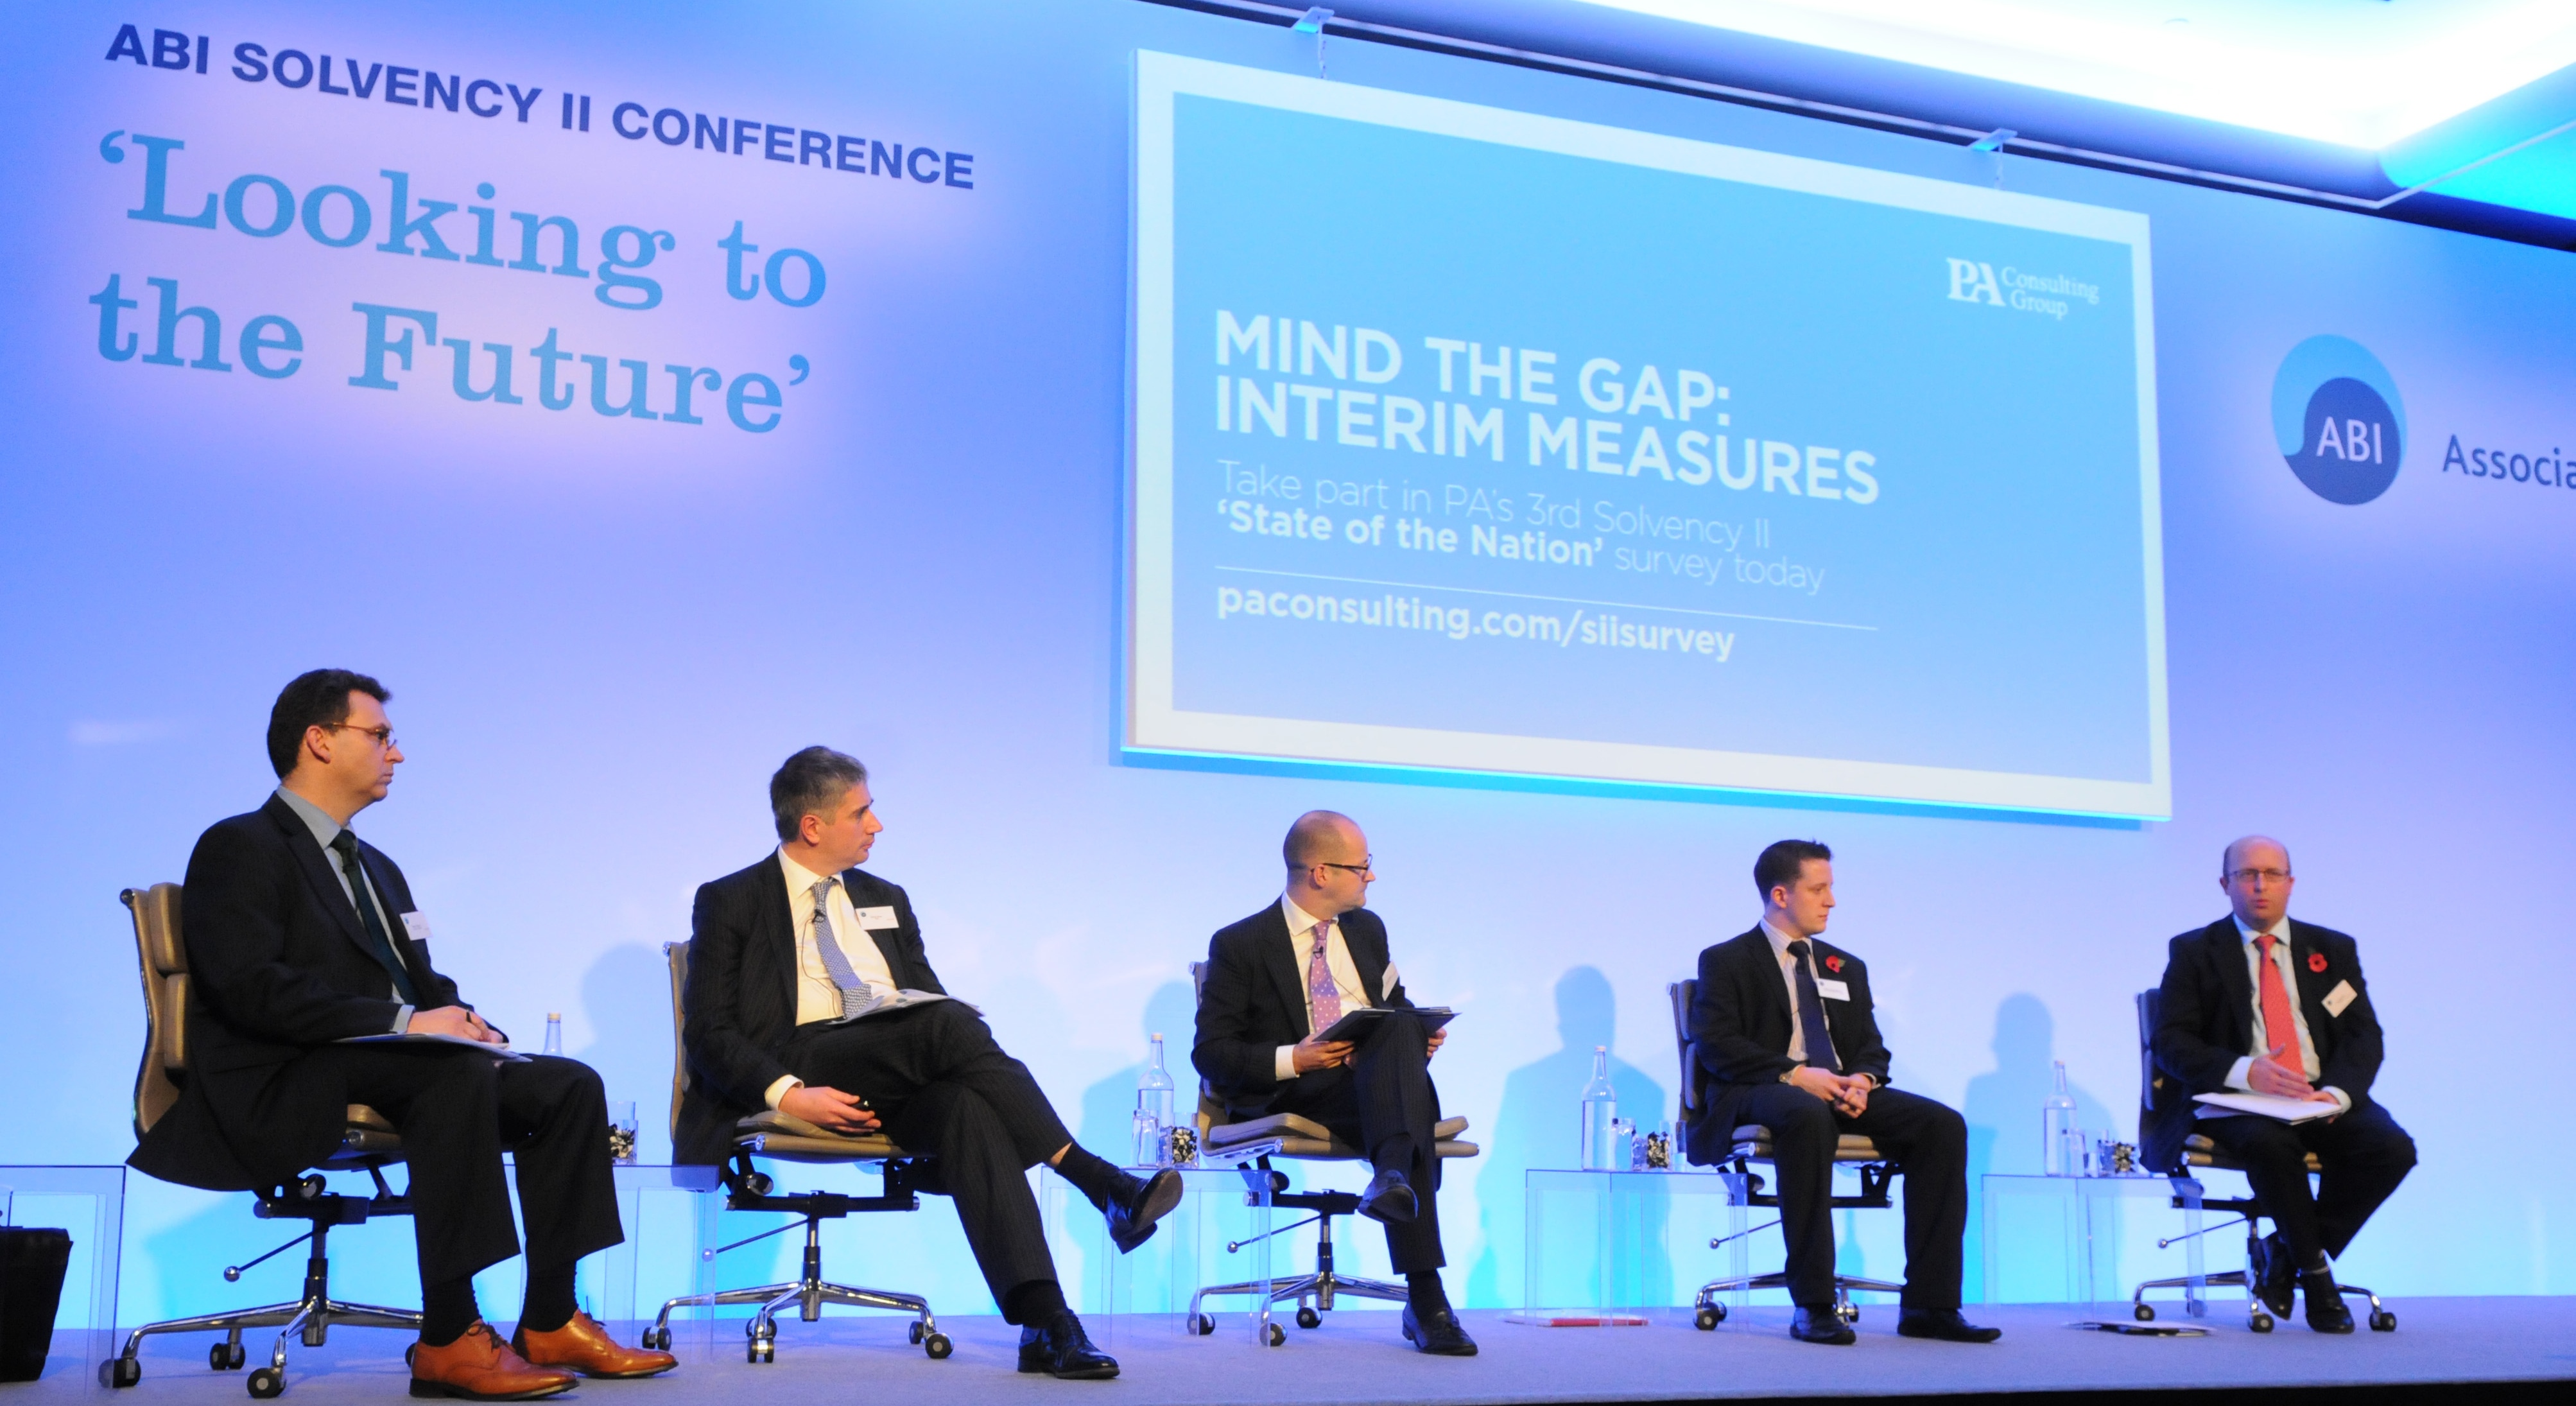 Speaking at the ABI Solvency II Conference 2013 2